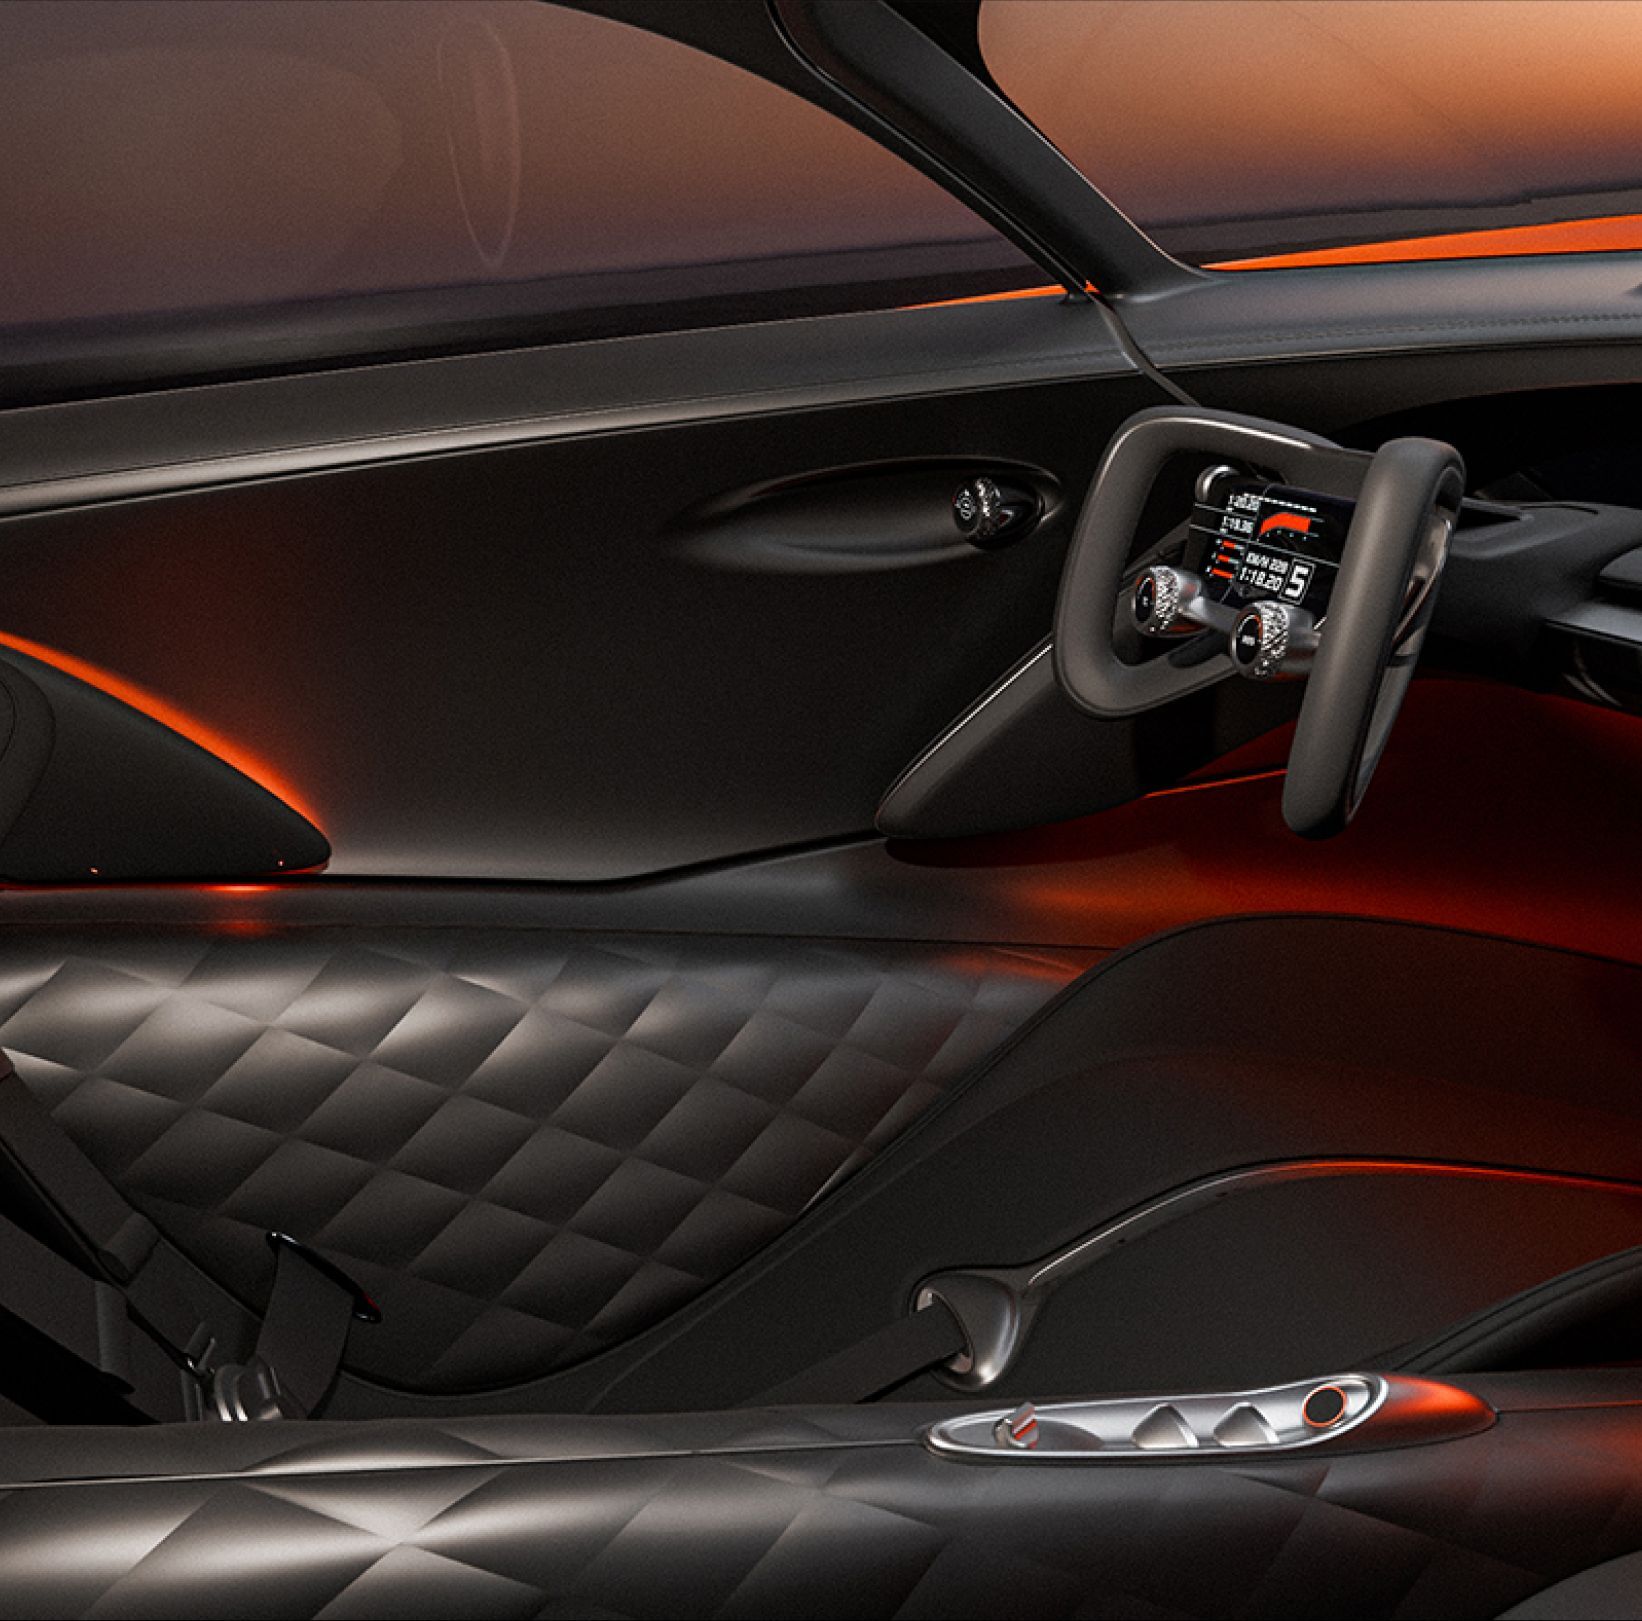 From the passenger seat, the view of the X Gran Berlinetta Concept’s driver’s seat is revealed. The interior is elegantly designed in black and silver, accented by a touch of fiery orange lighting. The steering wheel, featuring a central monitor and ribbon-like handles on either side, epitomizes modern sophistication.